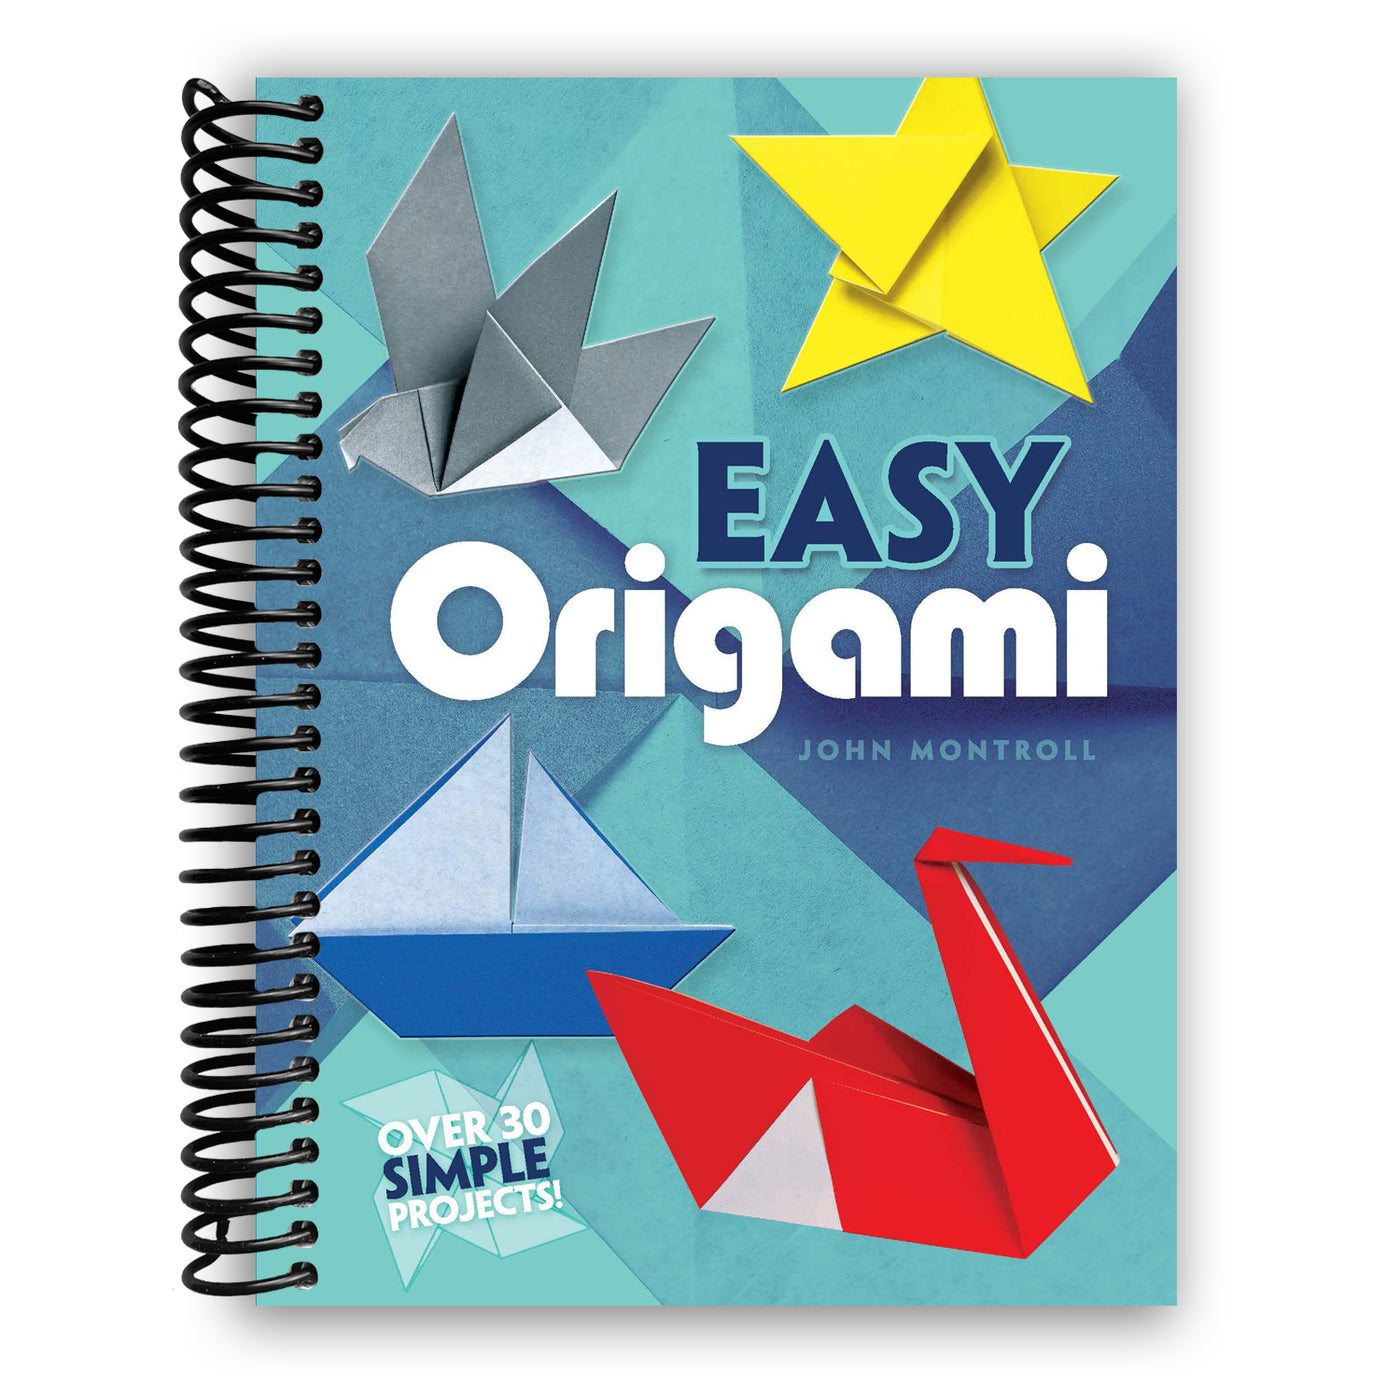 Easy Origami (Dover Origami Papercraft) over 30 simple projects (Spiral Bound)